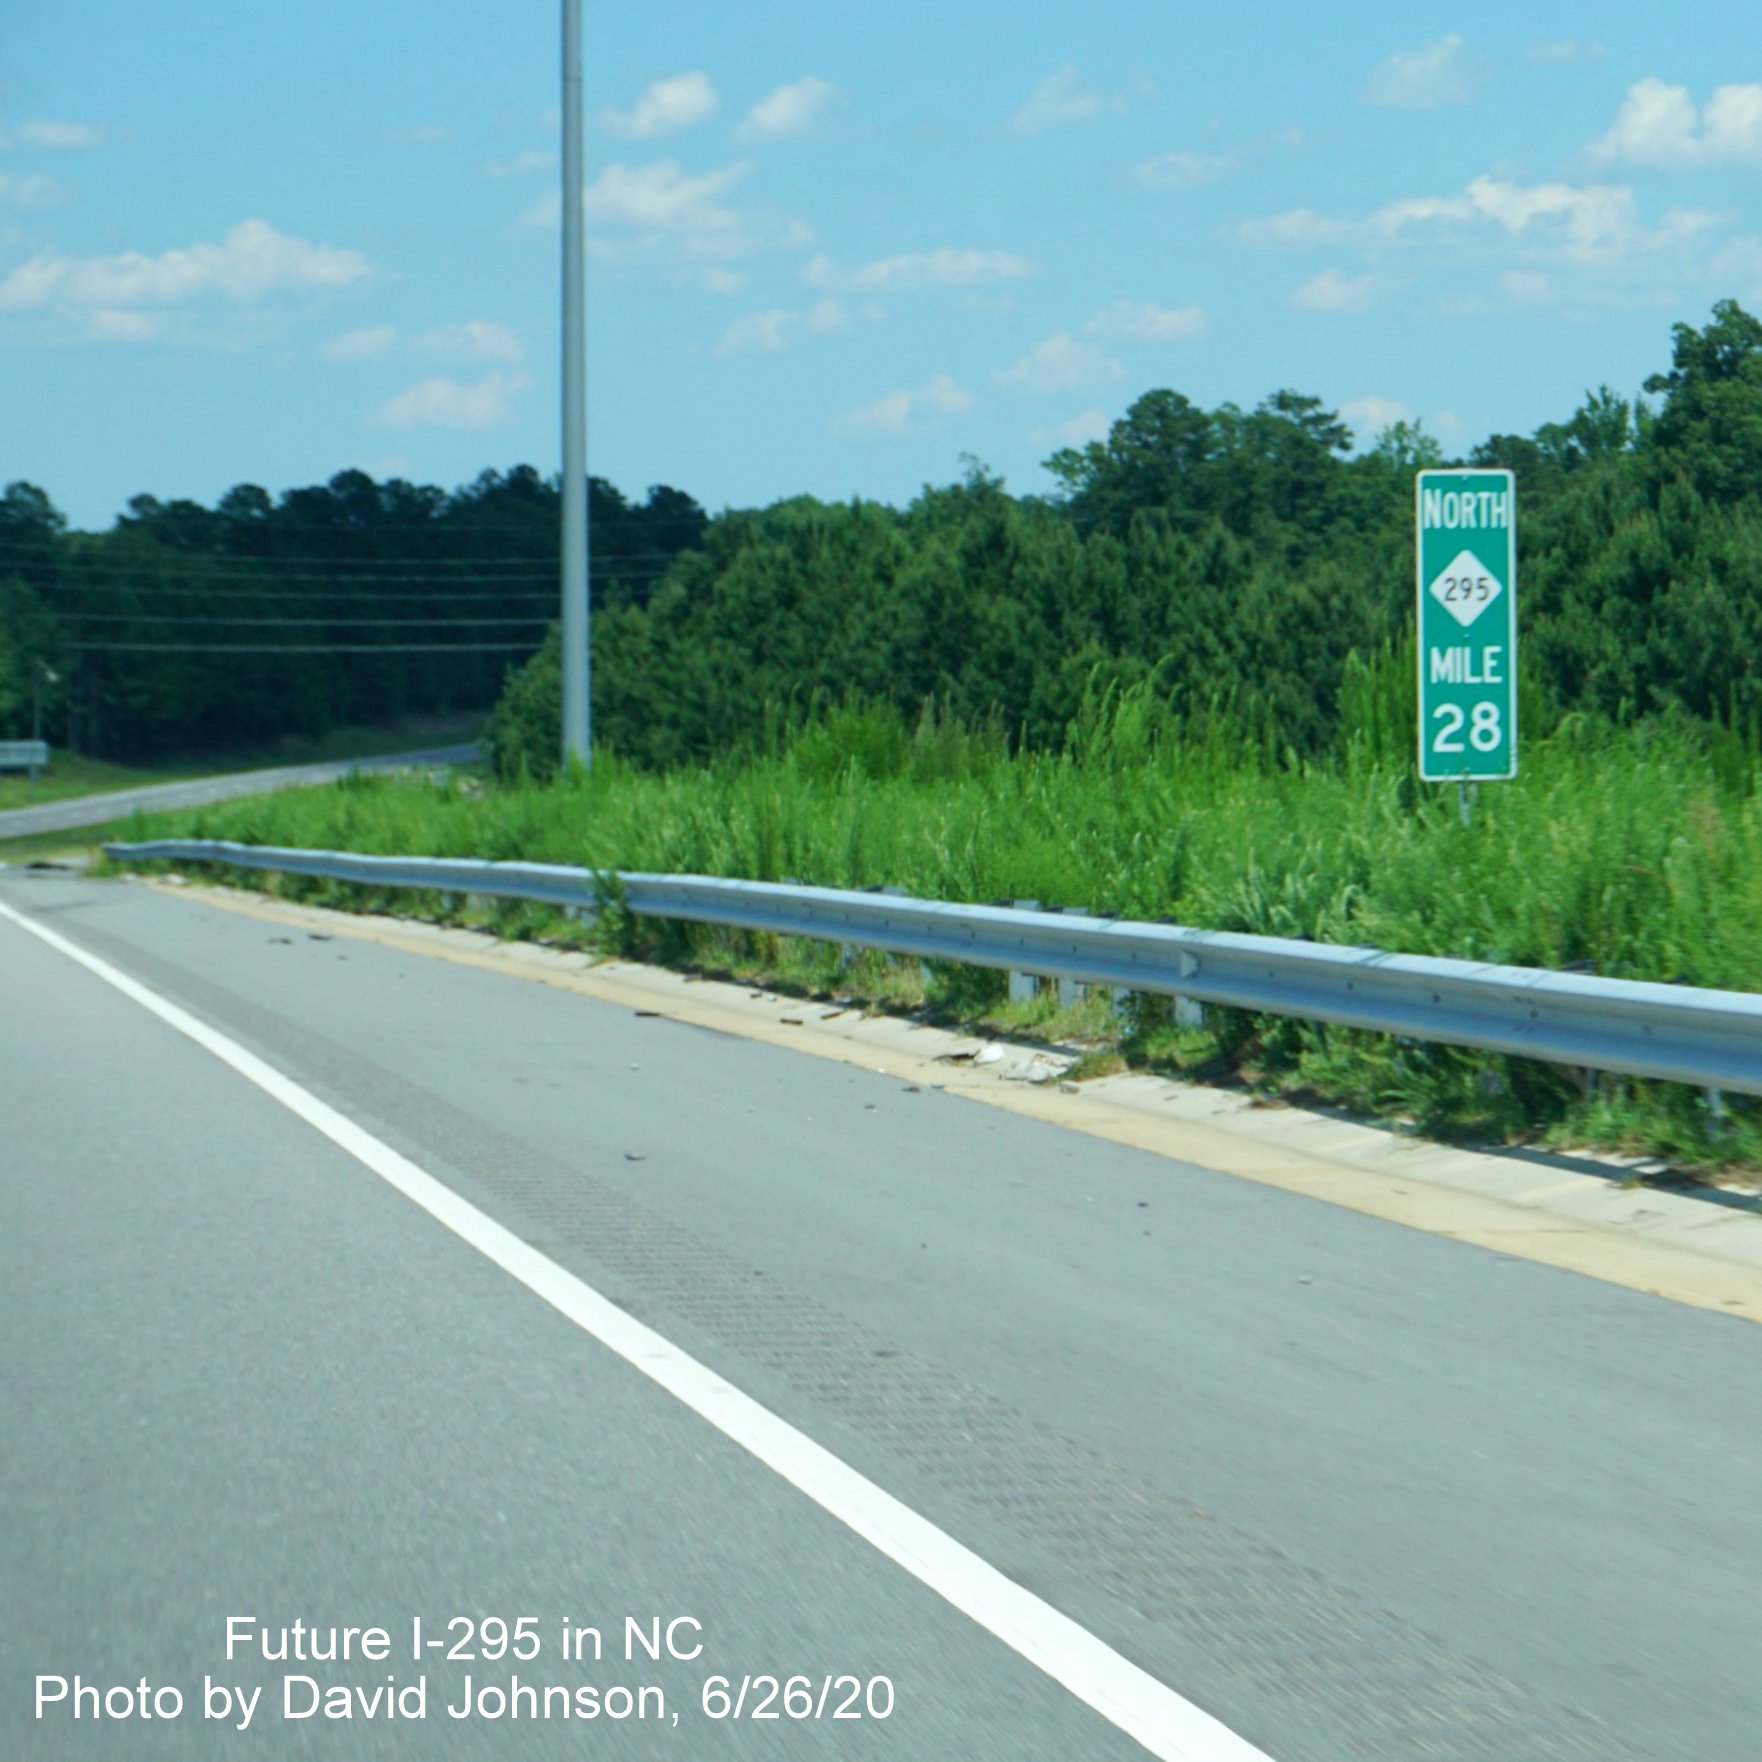 Image of North NC 295 mile marker on I-295 North in Fayetteville, by David Johnson June 2020